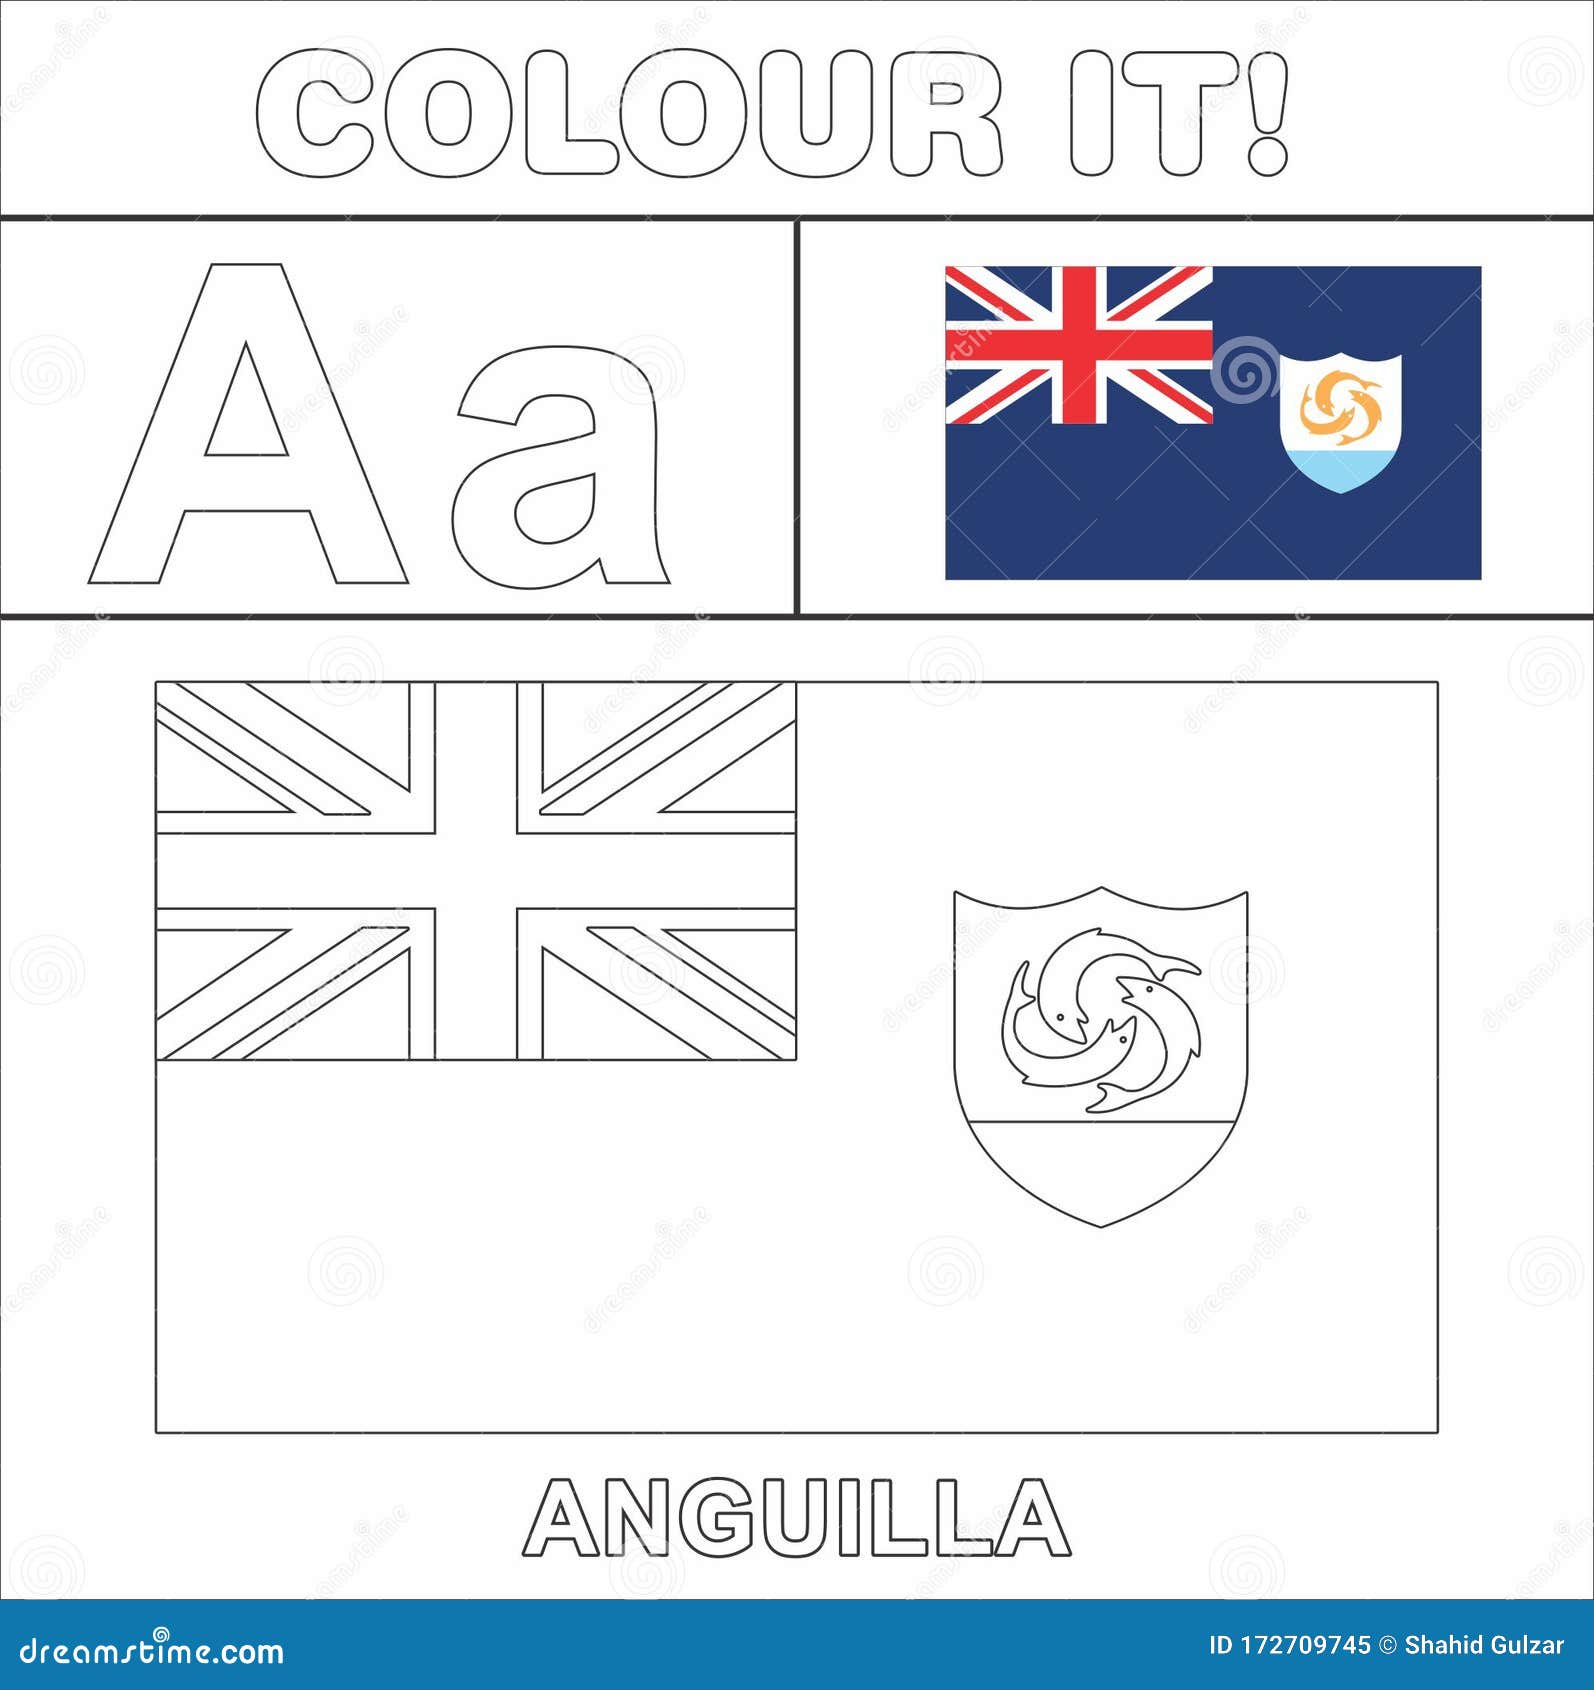 colour it kids colouring page country starting from english letter a a anguilla how to colorflag